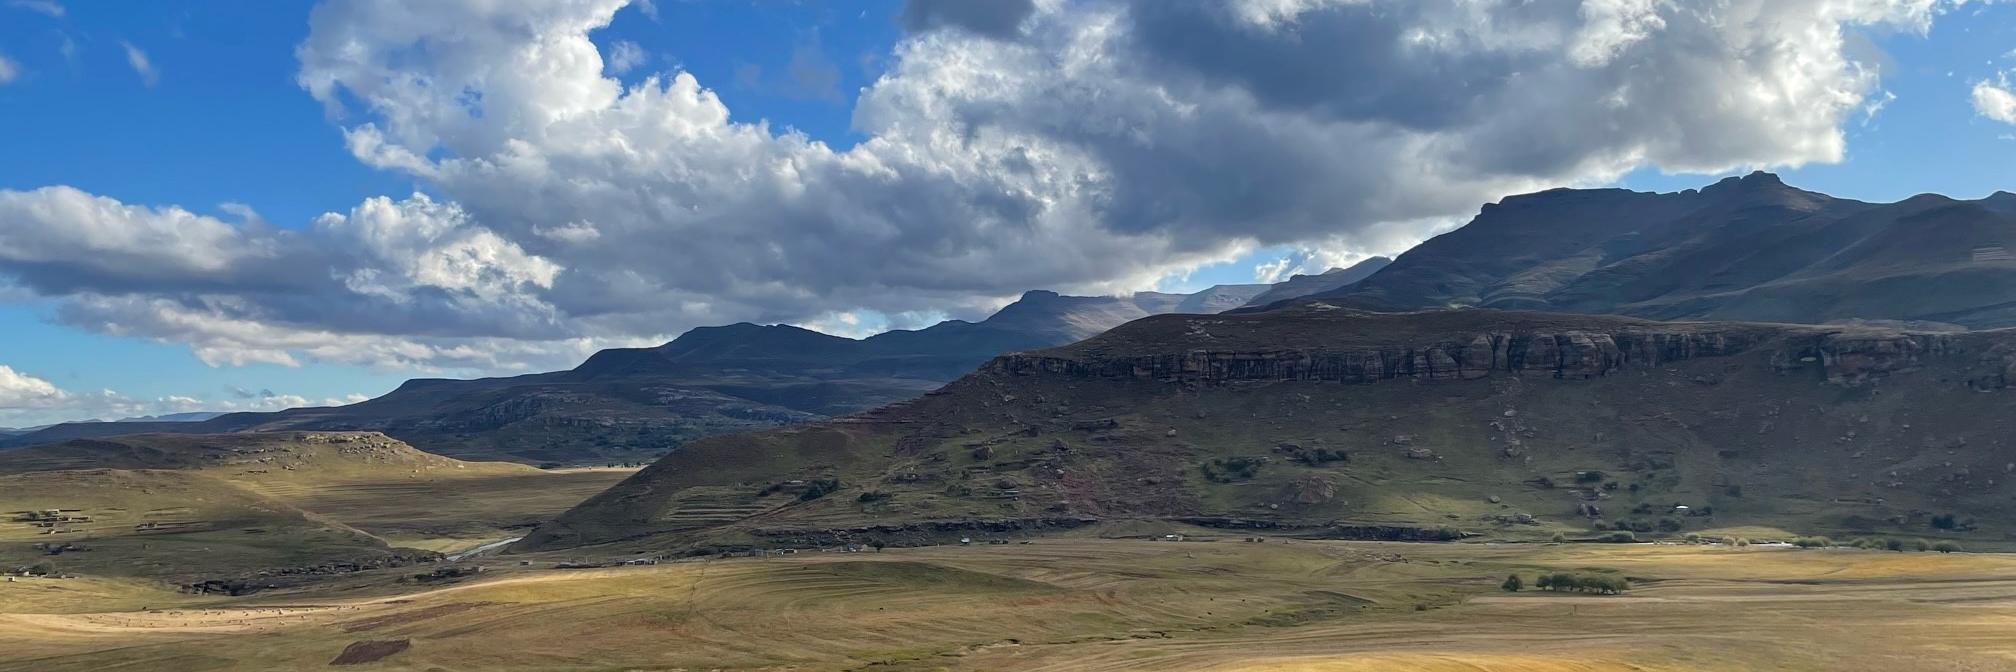 A vista of the Maloti-Drakensberg mountain area in Lesotho. A rolling plain gives way to tall, craggy mountains under blue skies with white puffy clouds.